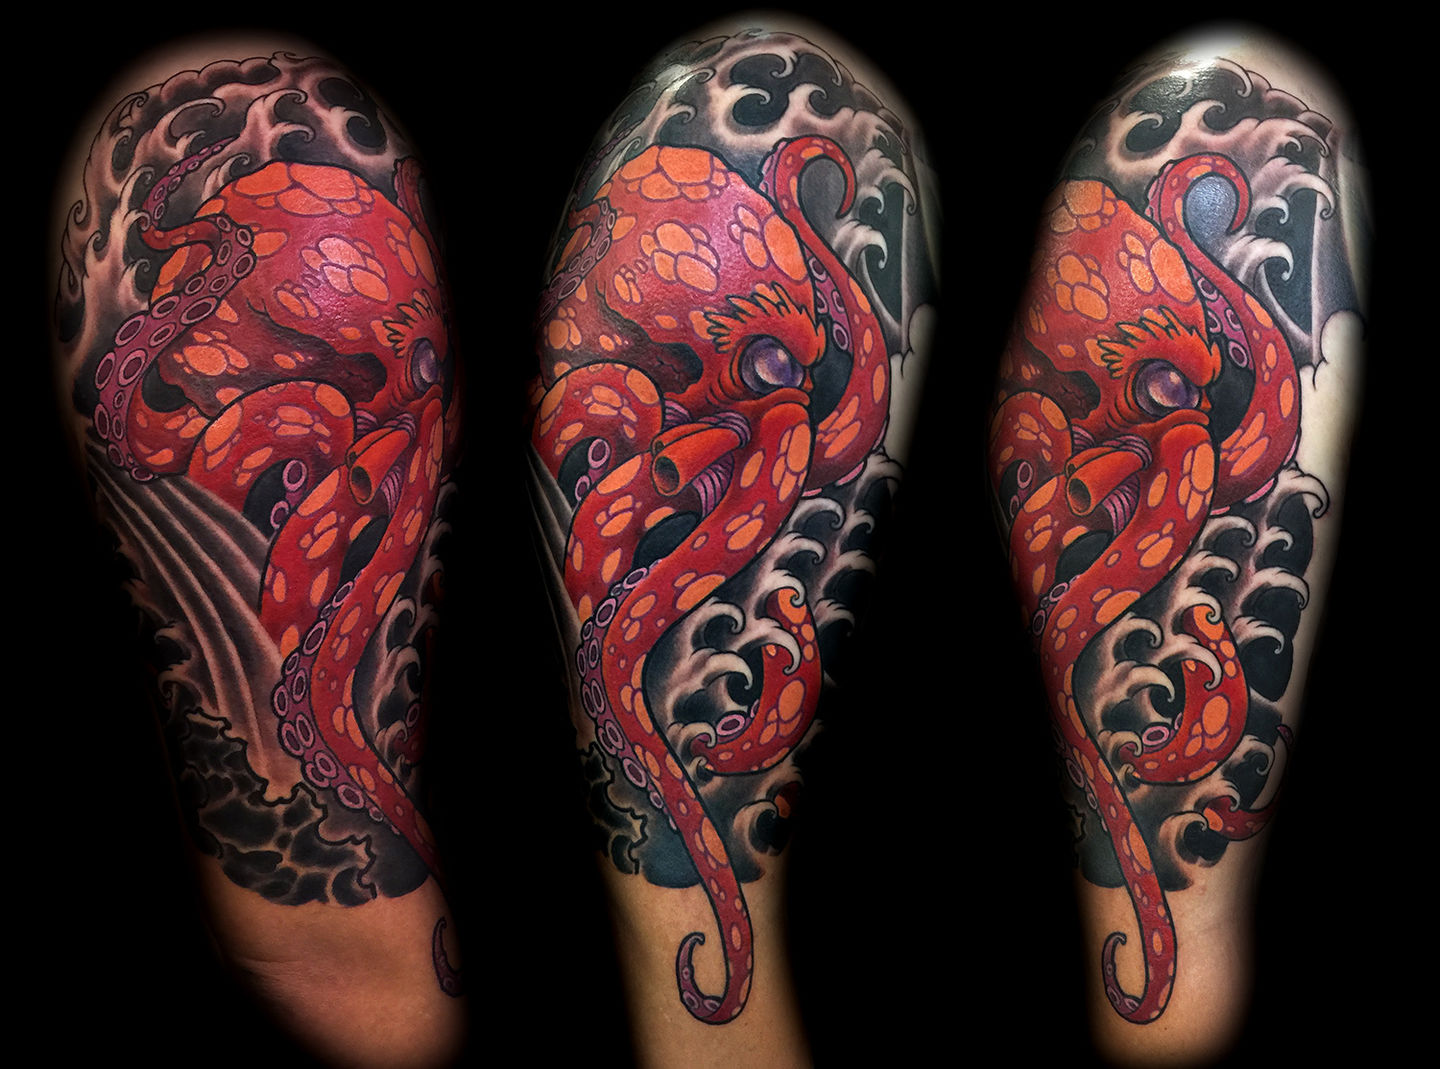 Japanese Octopus Tattoo Meaning and Symbolism - wide 3